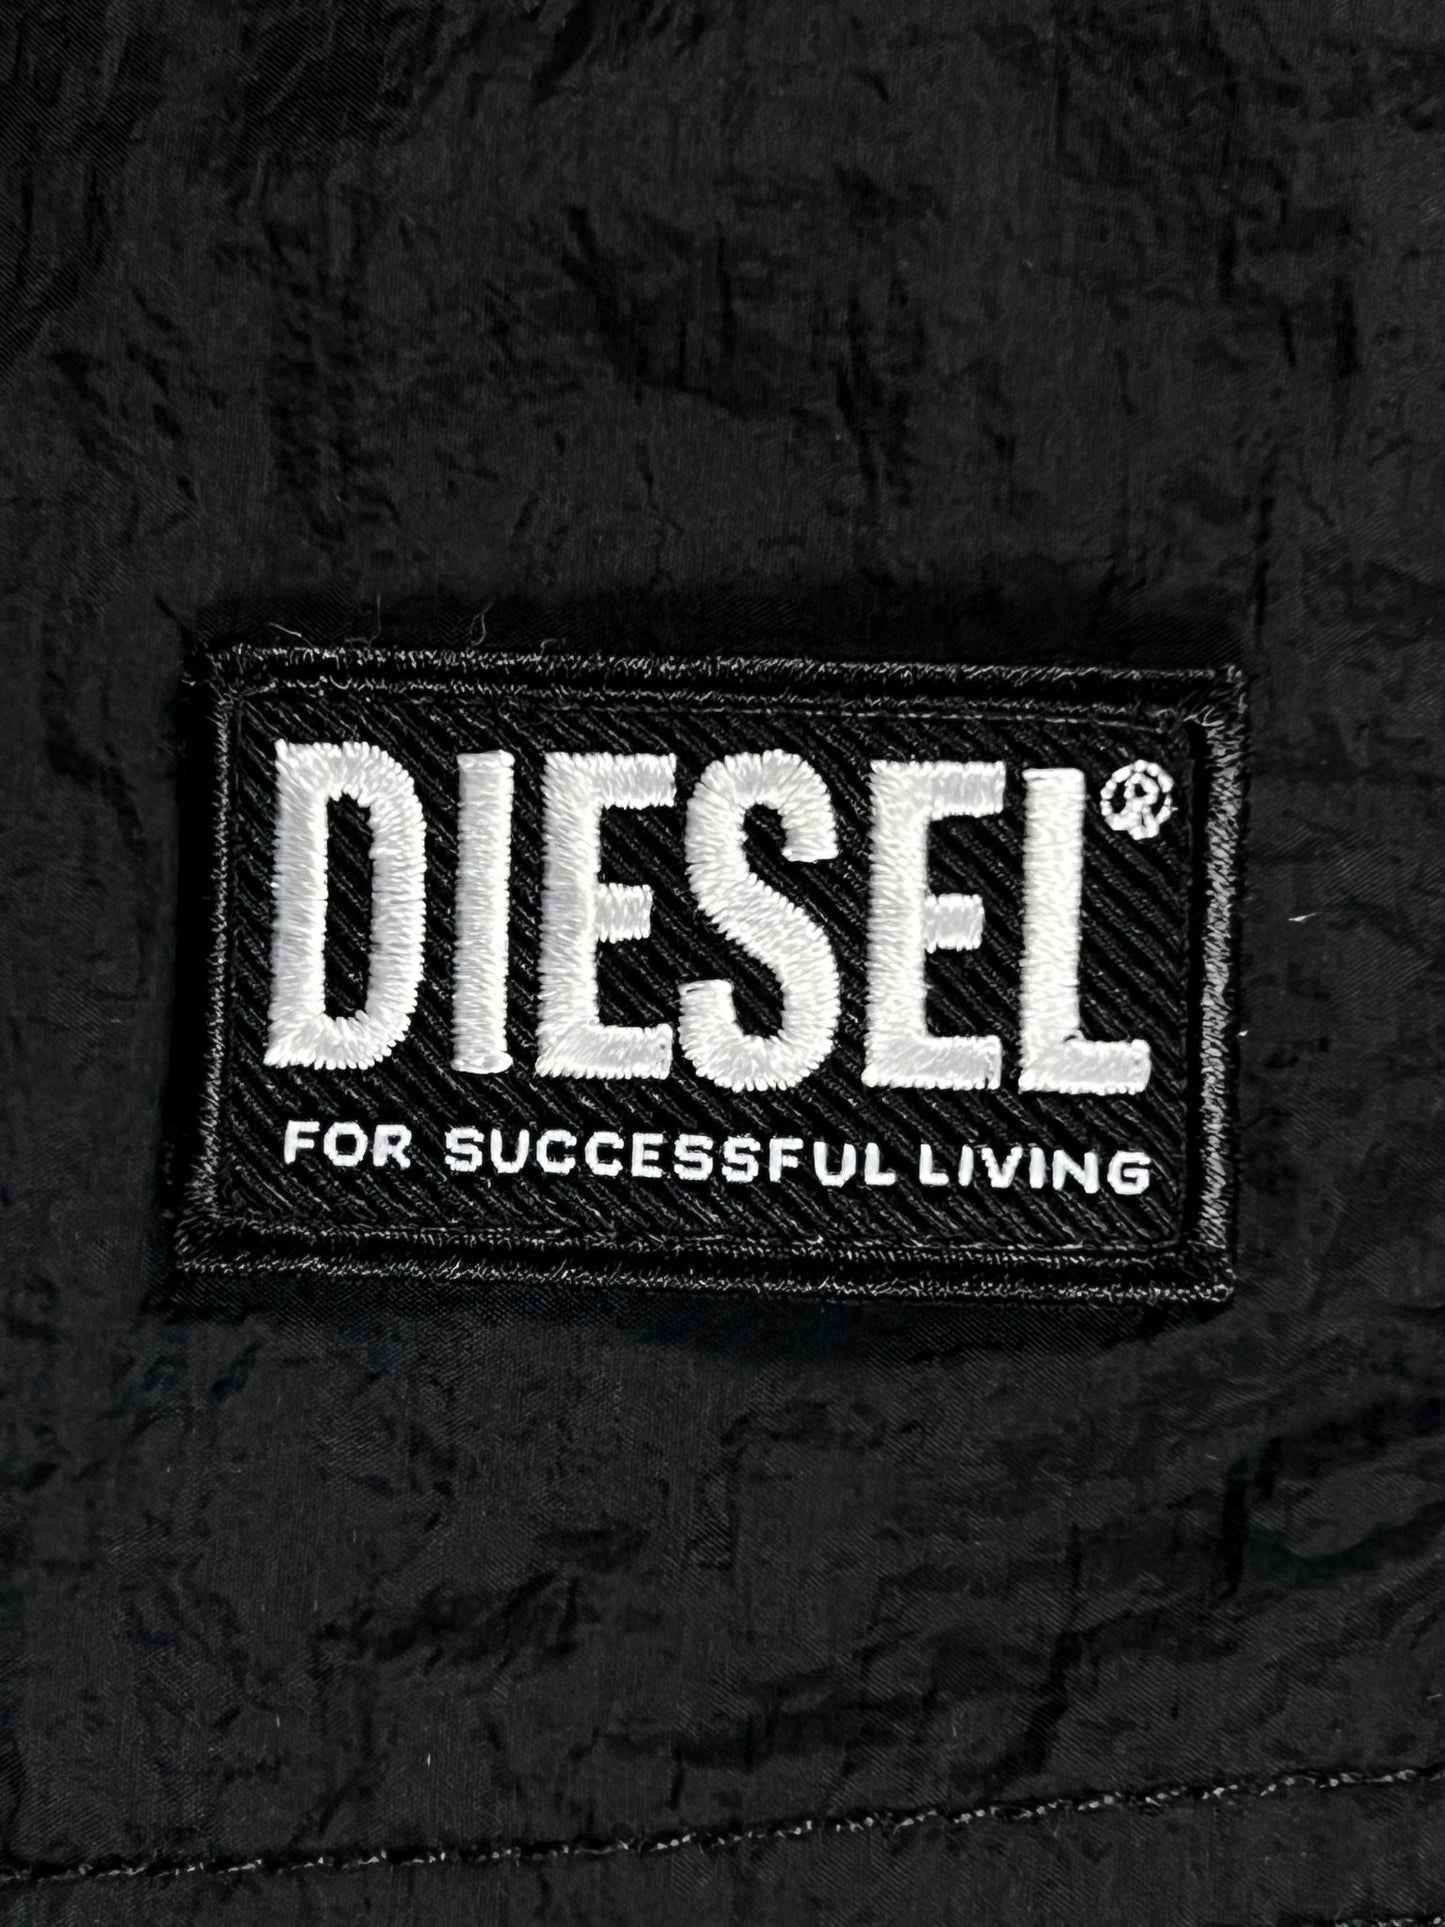 Black DIESEL BMBX-RIO-41CM-PARACHUTE SHORT BLACK label with white embroidered text "diesel" and the slogan "for successful living" on a recycled fabric background.